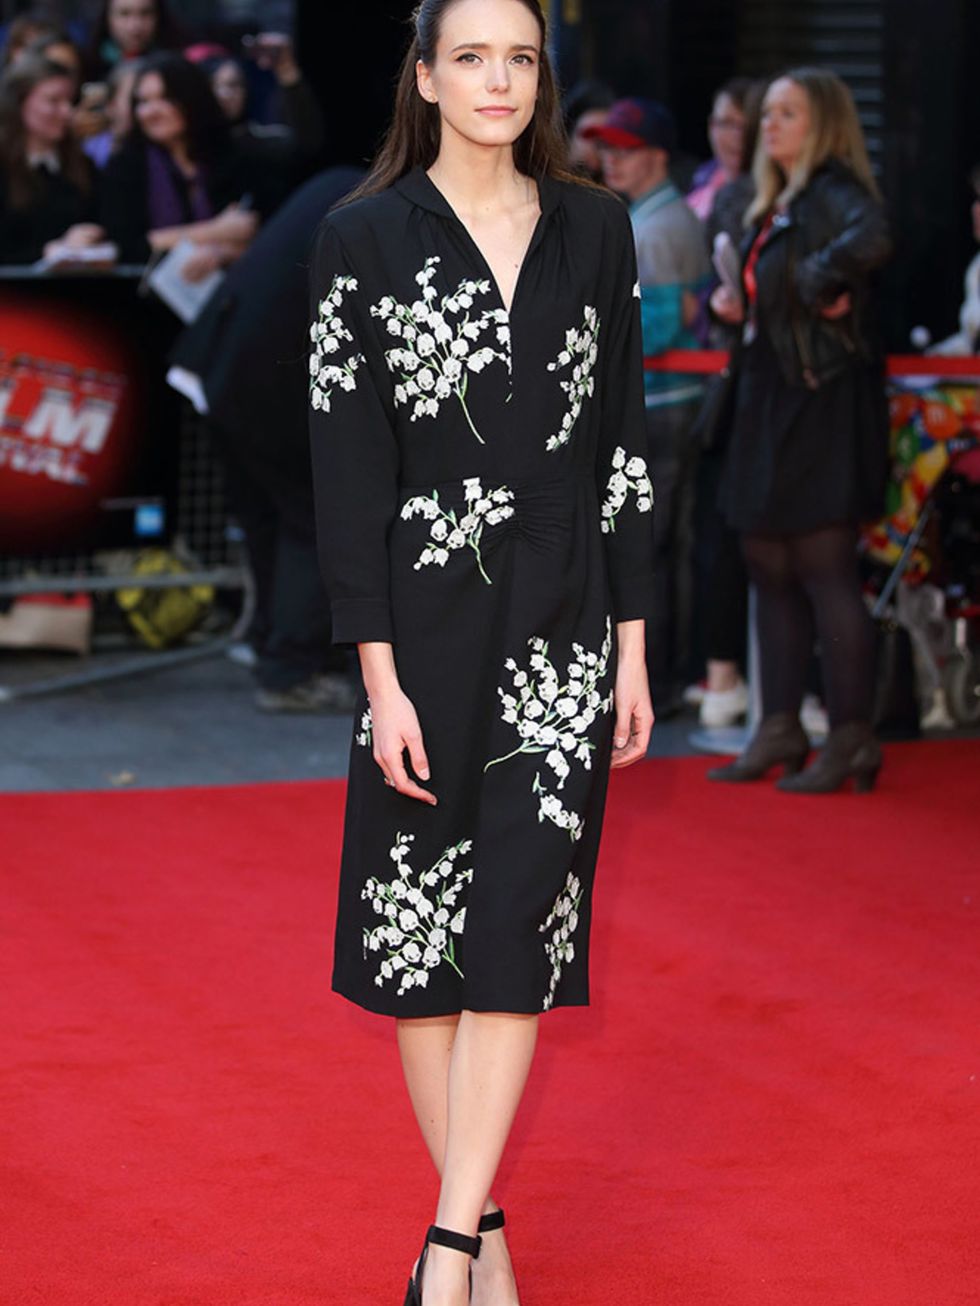 Stacy Martin attends the High-Rise Screening, during the BFI London Film Festival in London, October 2015.